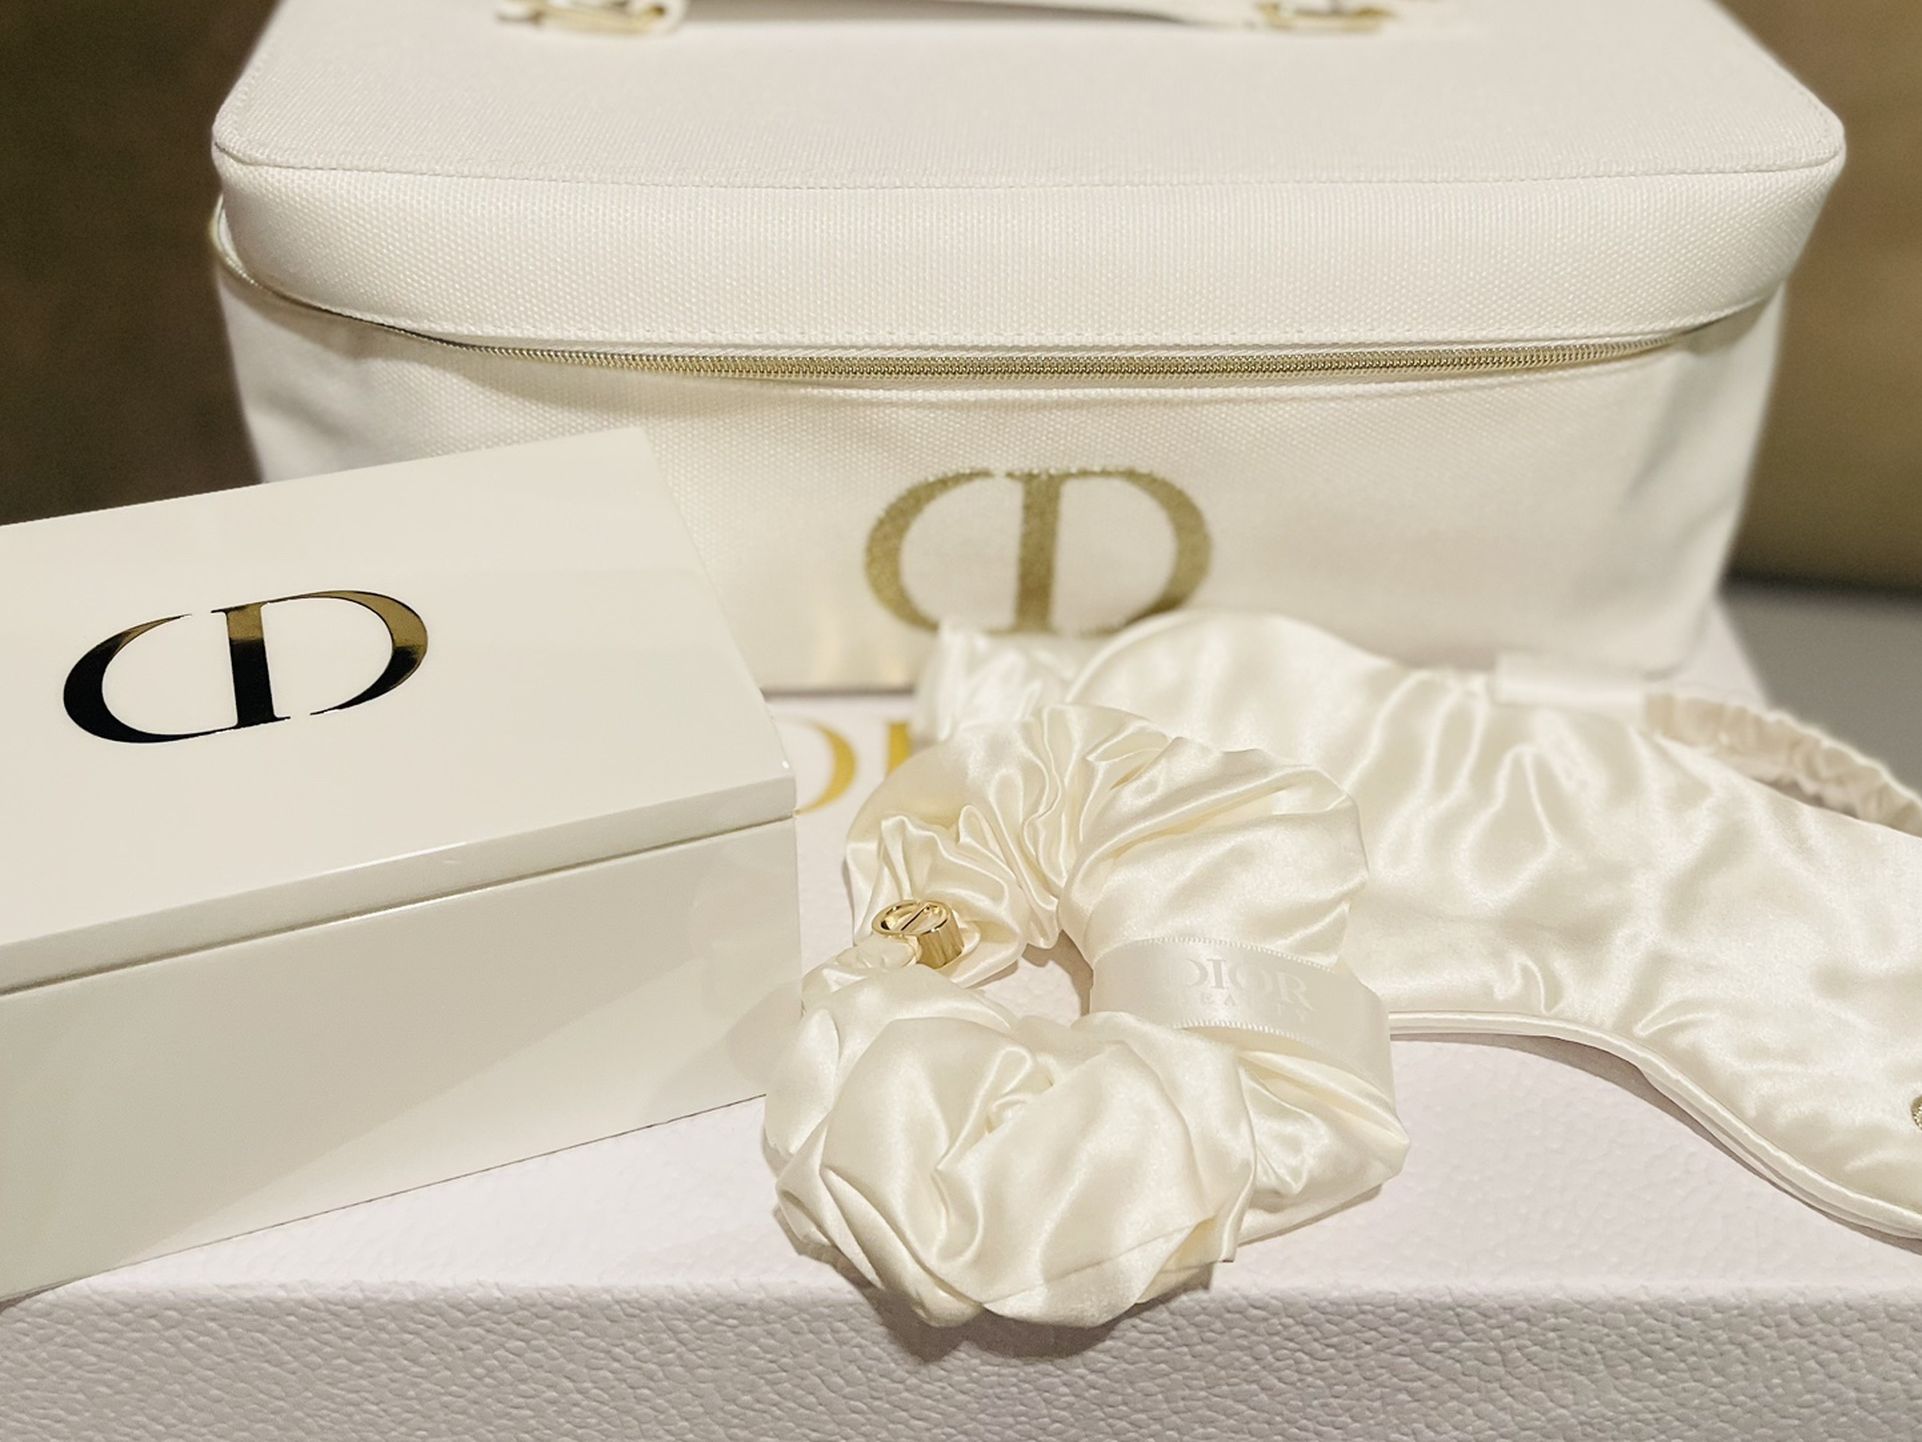 Dior Beauty Vanity Case Set Silk Eye Mask Hair Tie With Dior Box perfect for Valentines Day